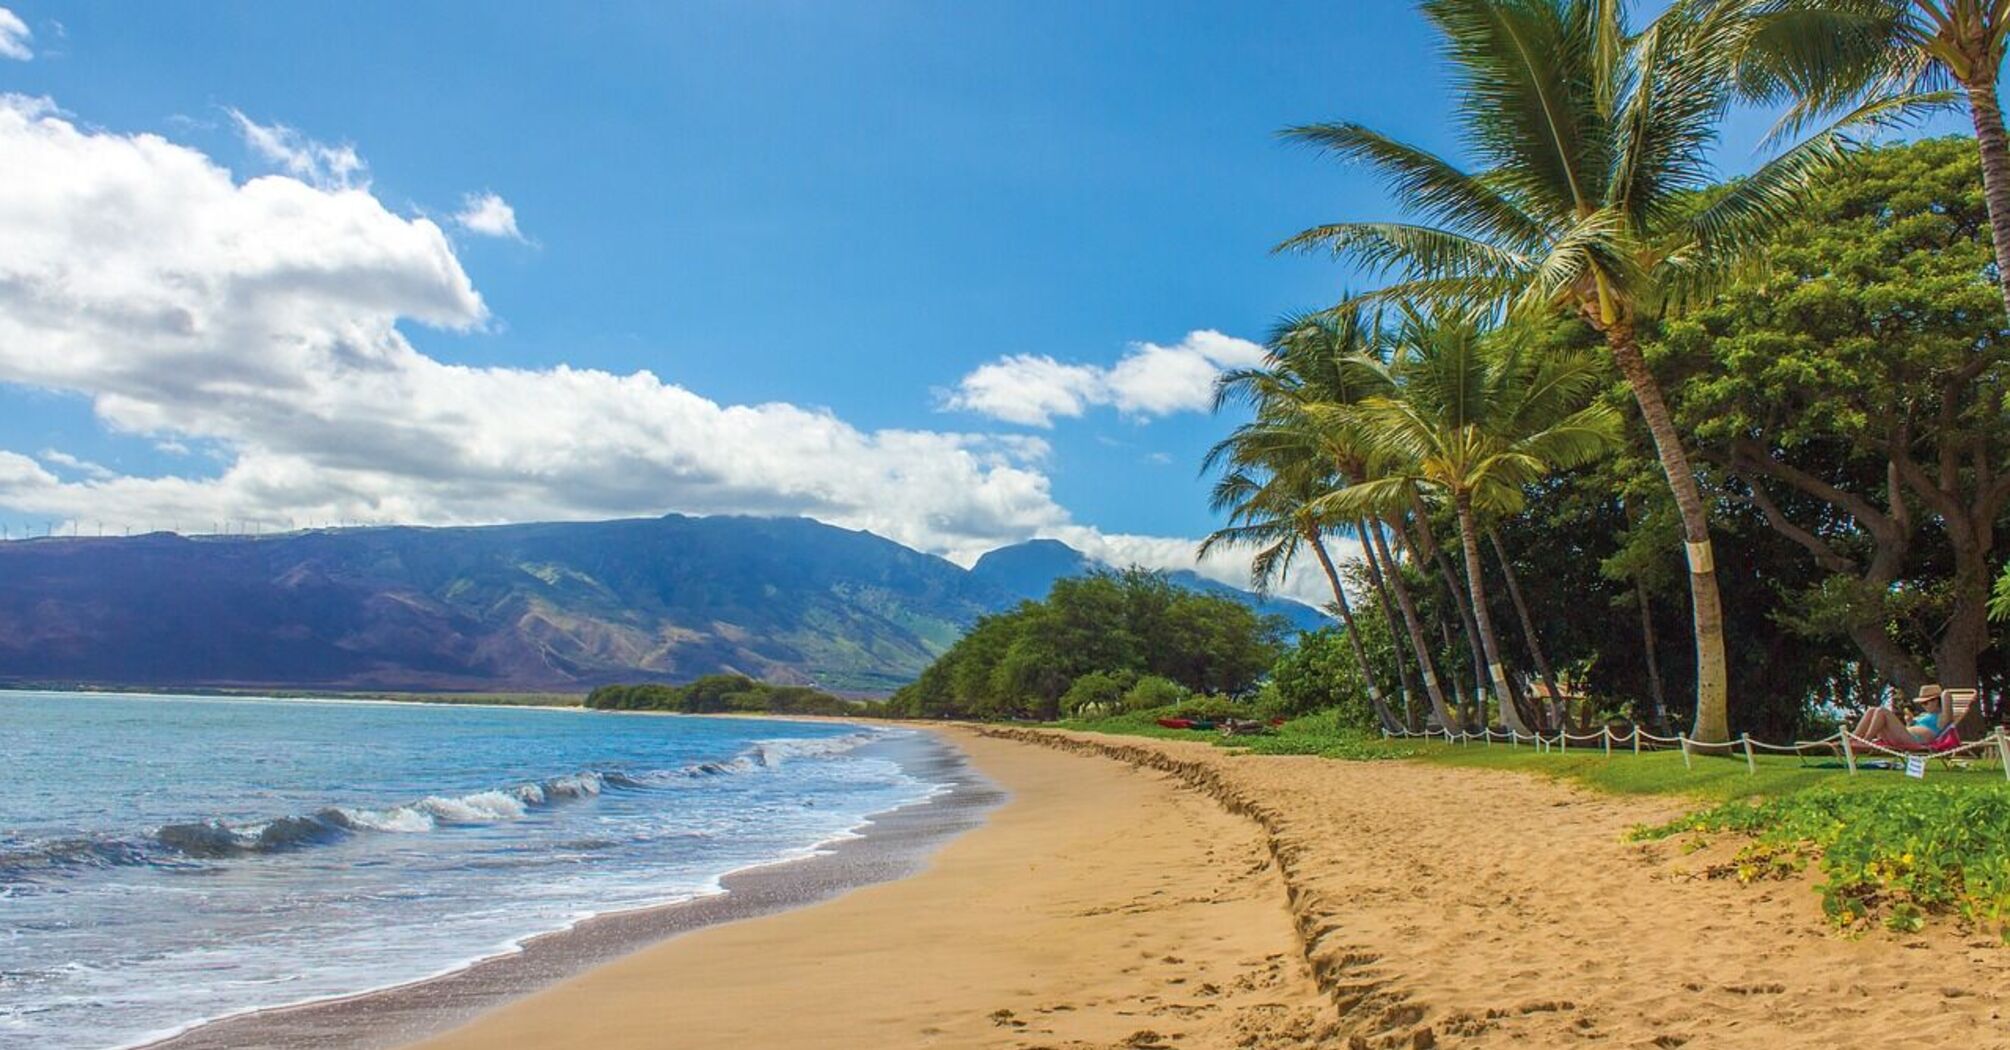 Tips for responsible travel to Maui